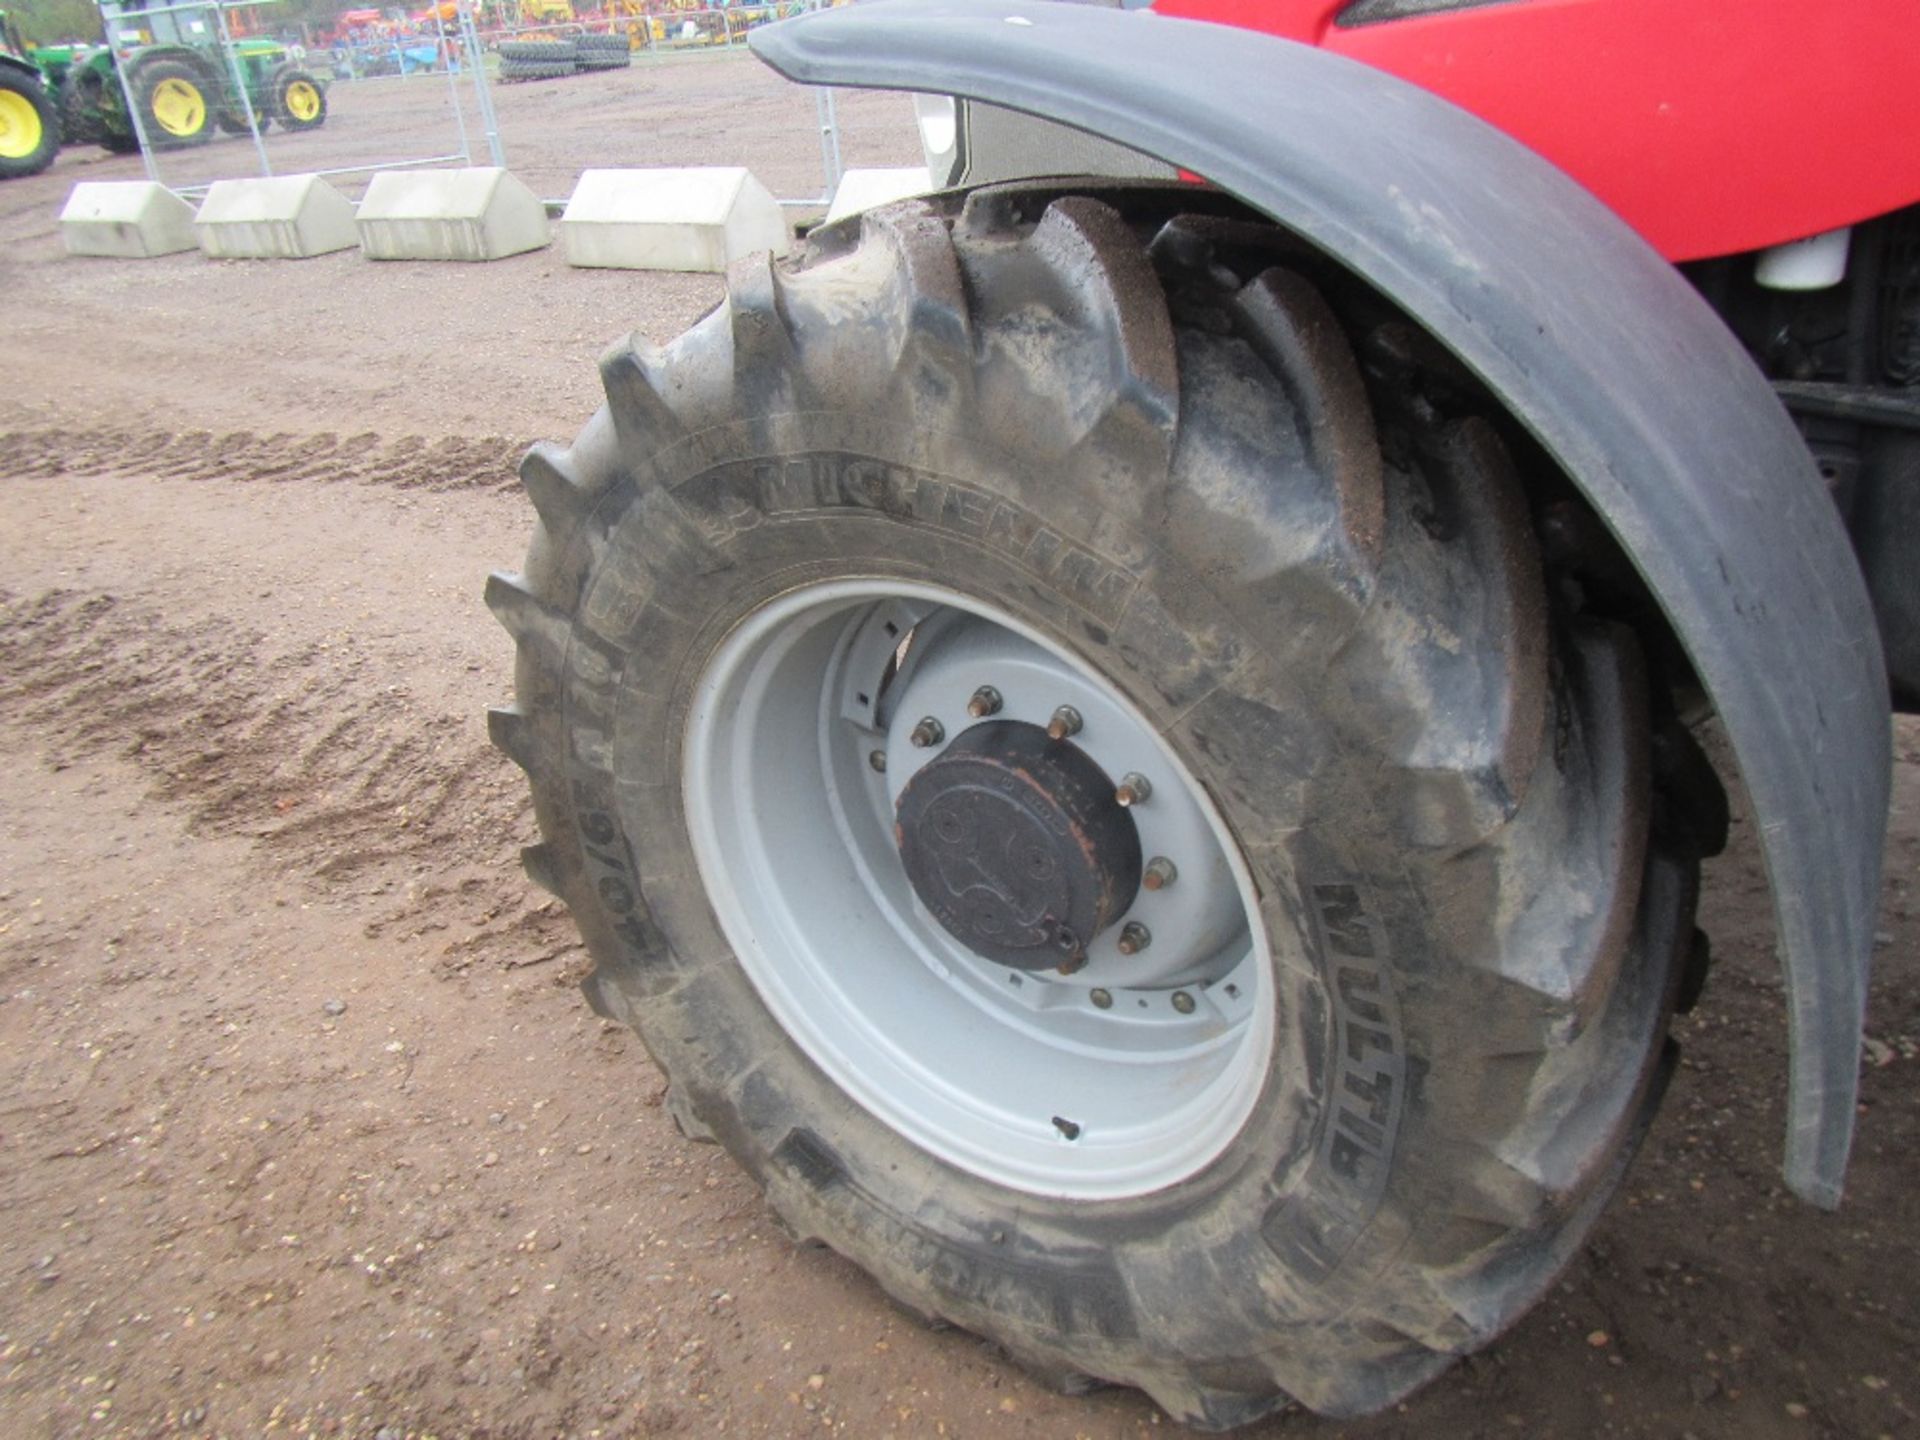 McCormick XTX165 Tractor. Reg Docs will be supplied. 3948 hrs. Reg. No. DX09 MWN. Ser No 44062 - Image 12 of 18